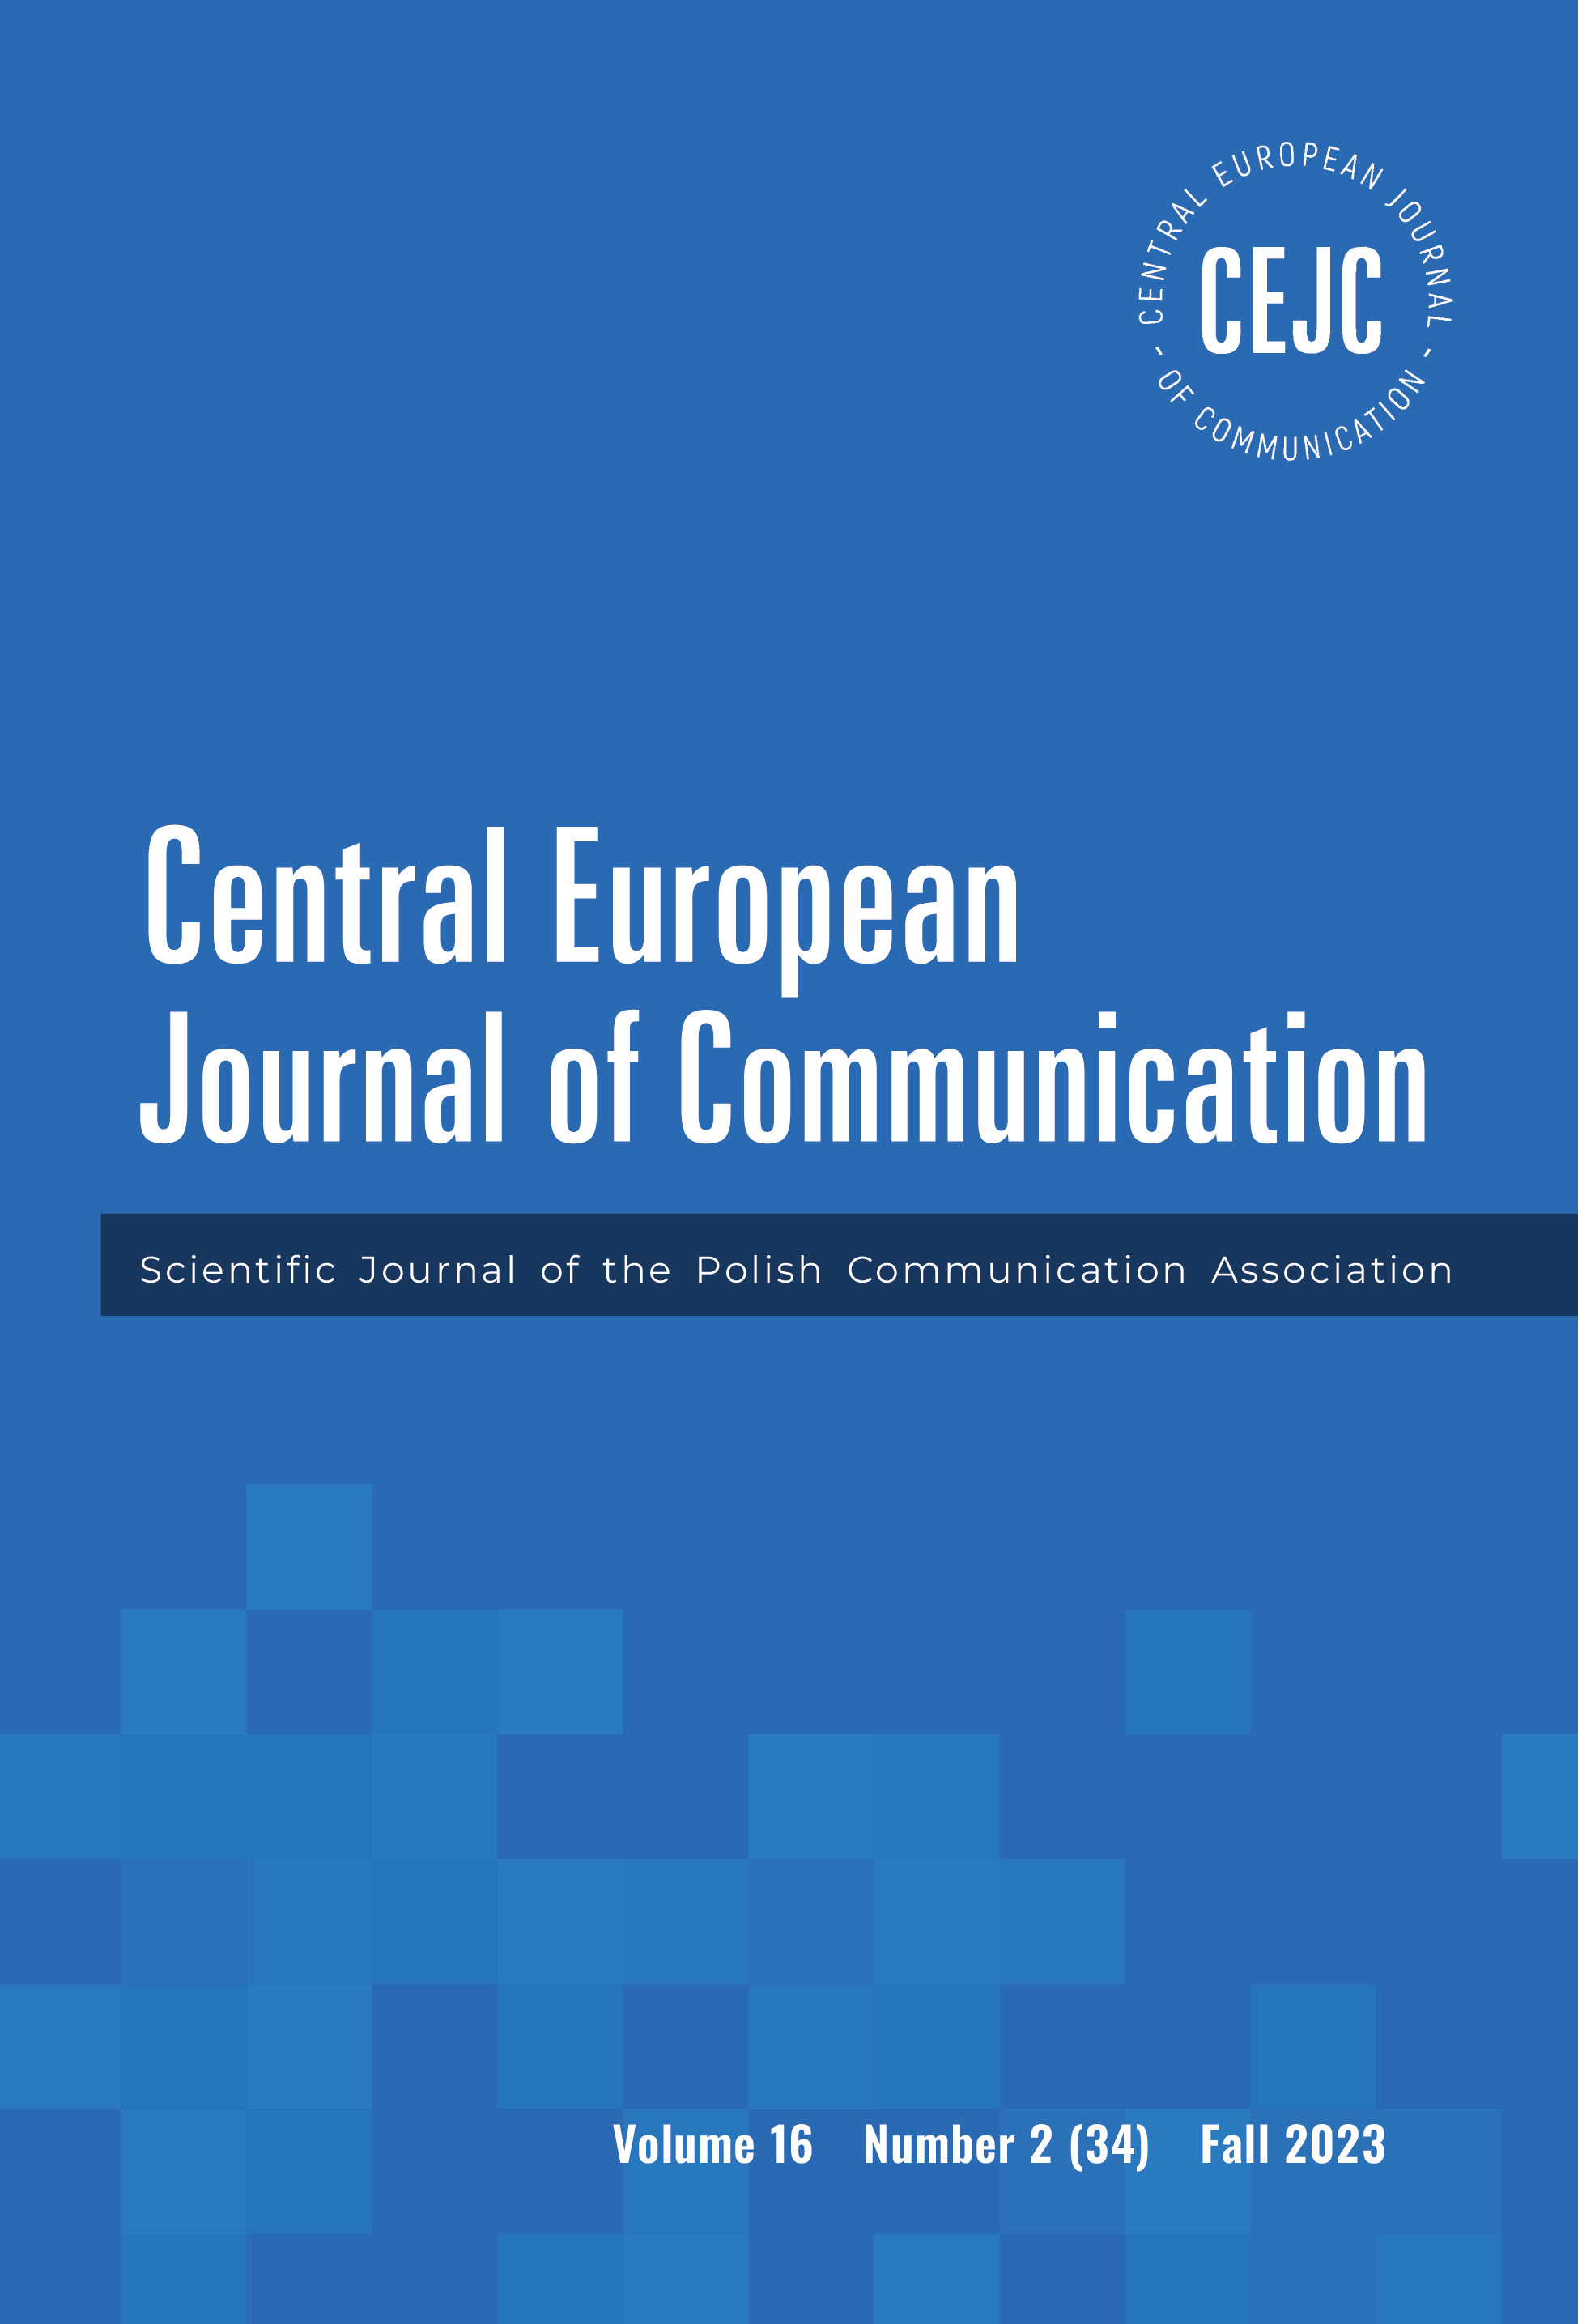 Göran Bolin & Per Ståhlberg (2023): Managing Meaning in Ukraine: Information, Communication, and Narration since the Euromaidan Revolution Cover Image